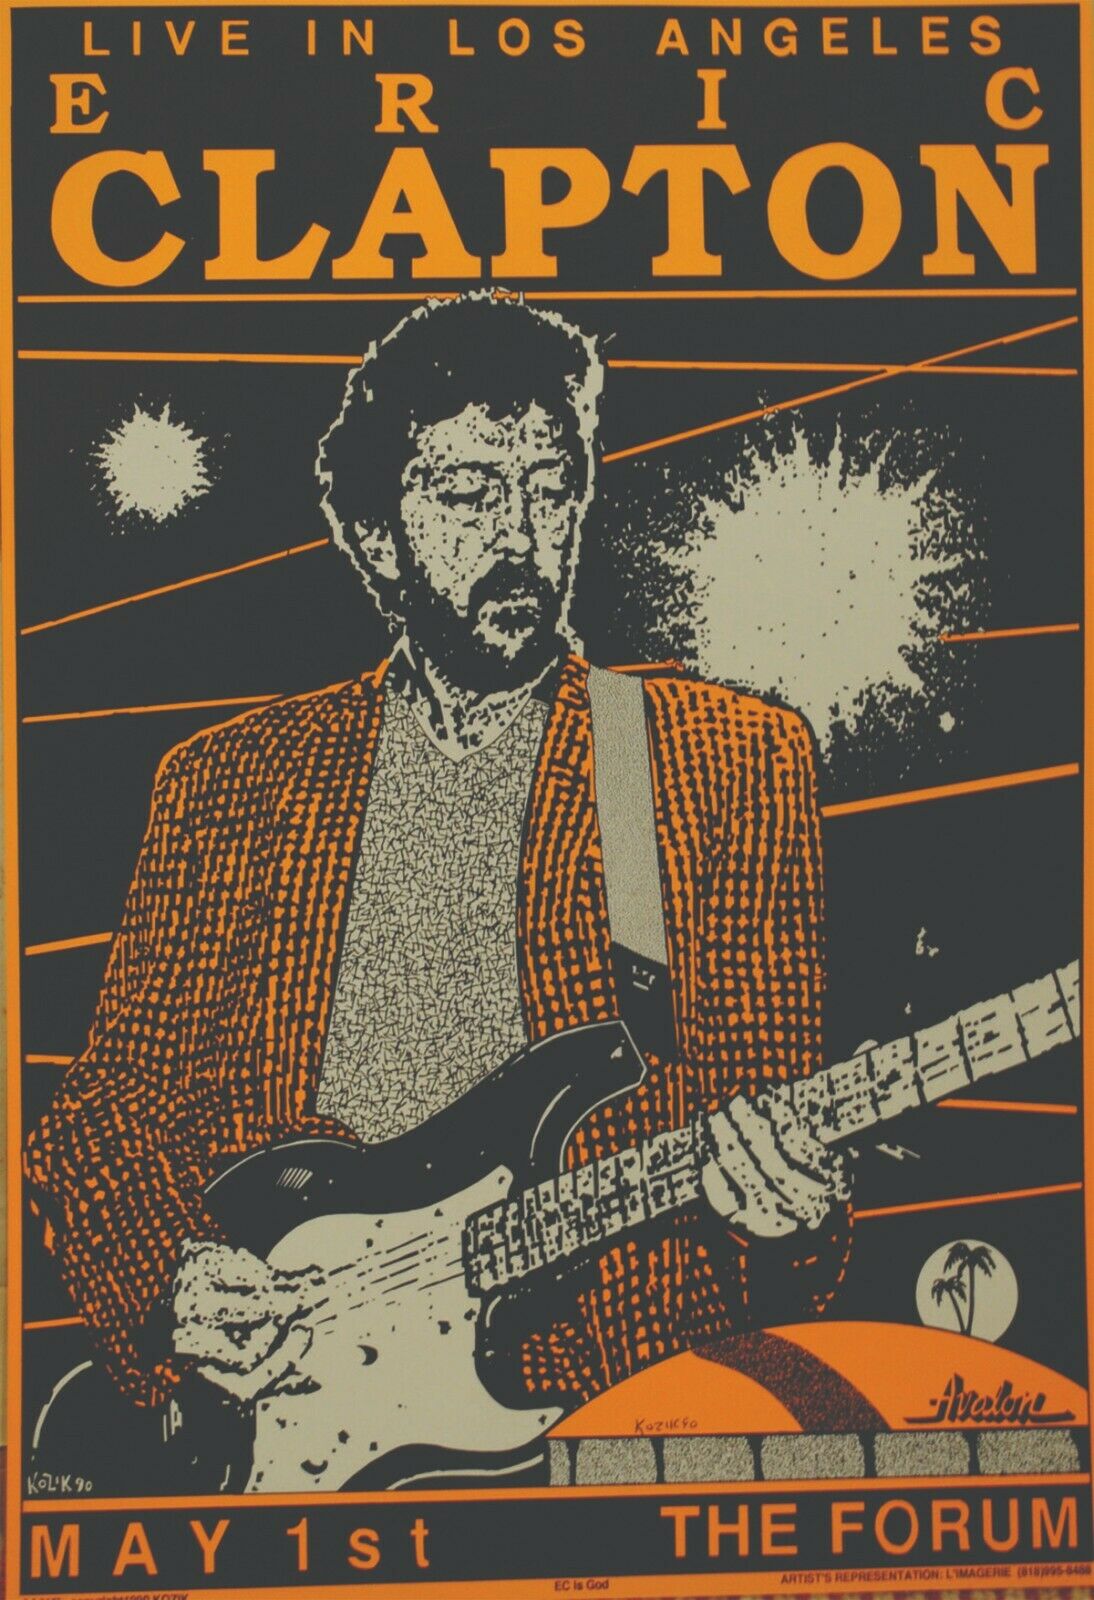 Eric Clapton Reproduction 4" X 6" Mini Concert Poster Free Top Loader